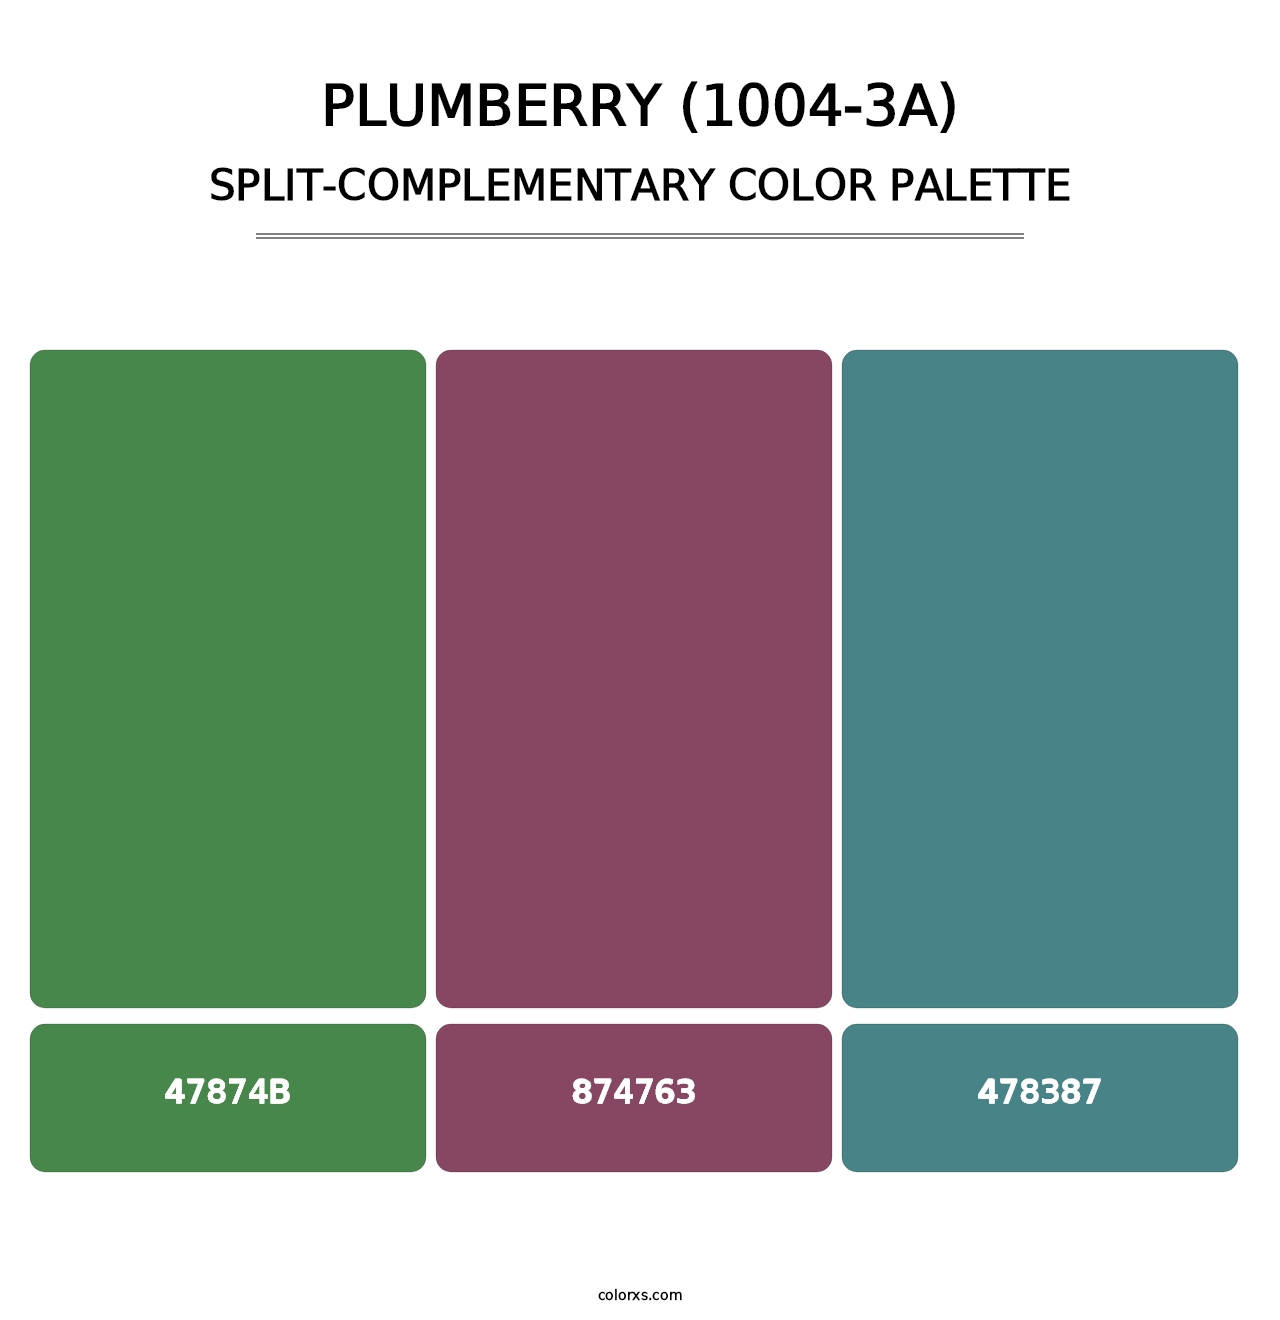 Plumberry (1004-3A) - Split-Complementary Color Palette